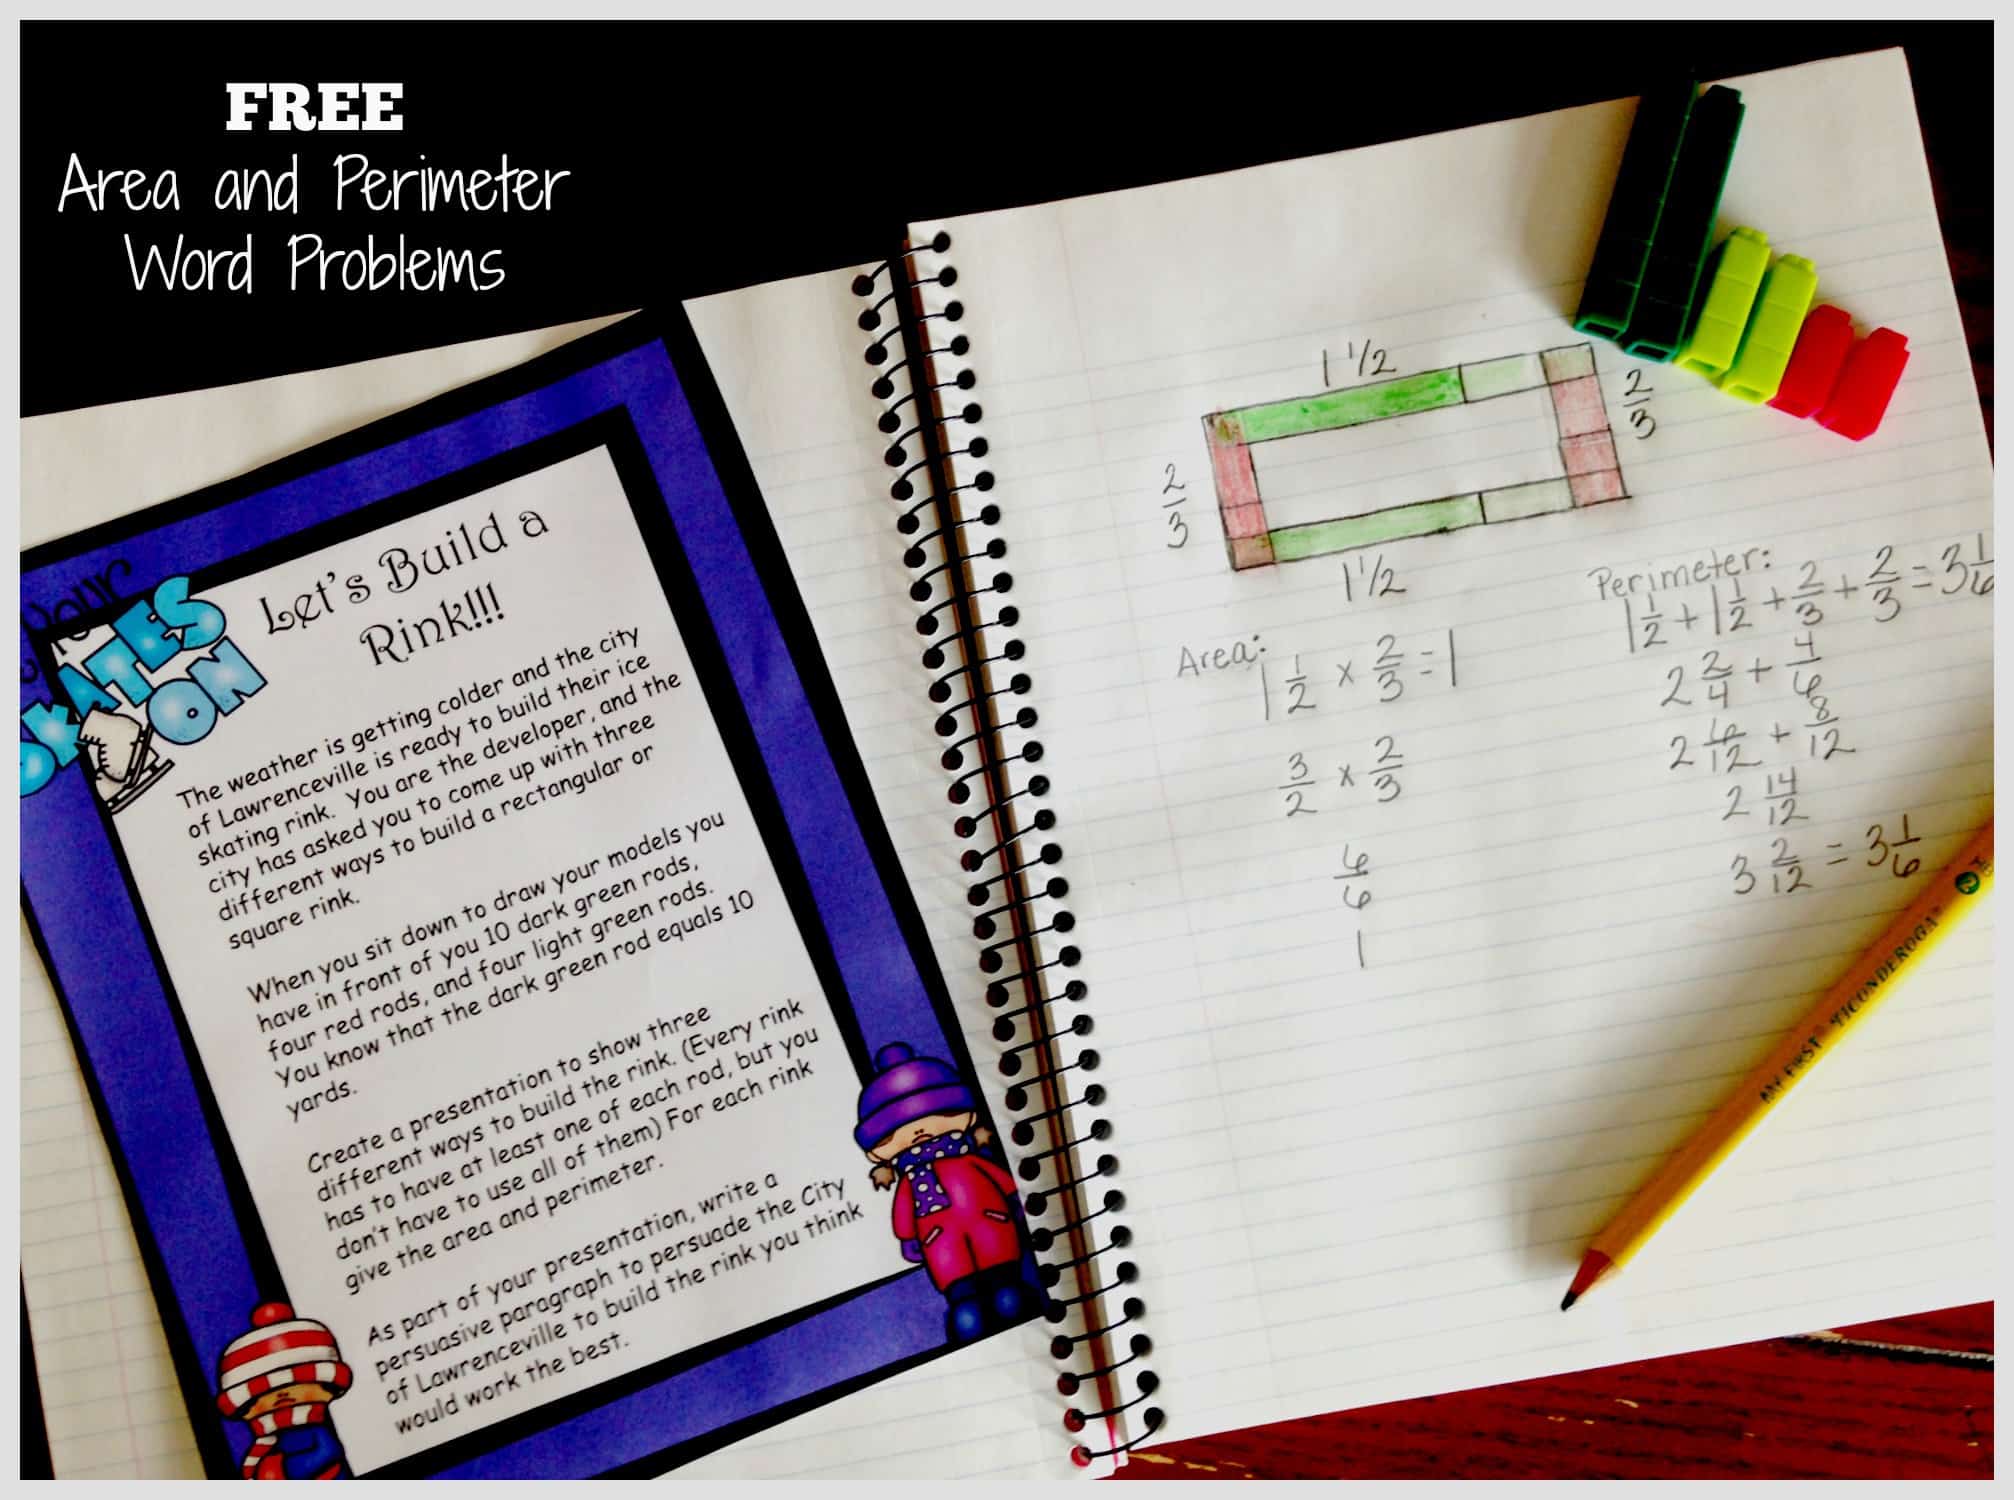 Area and perimeter word problem worksheet on a table with a pencil.